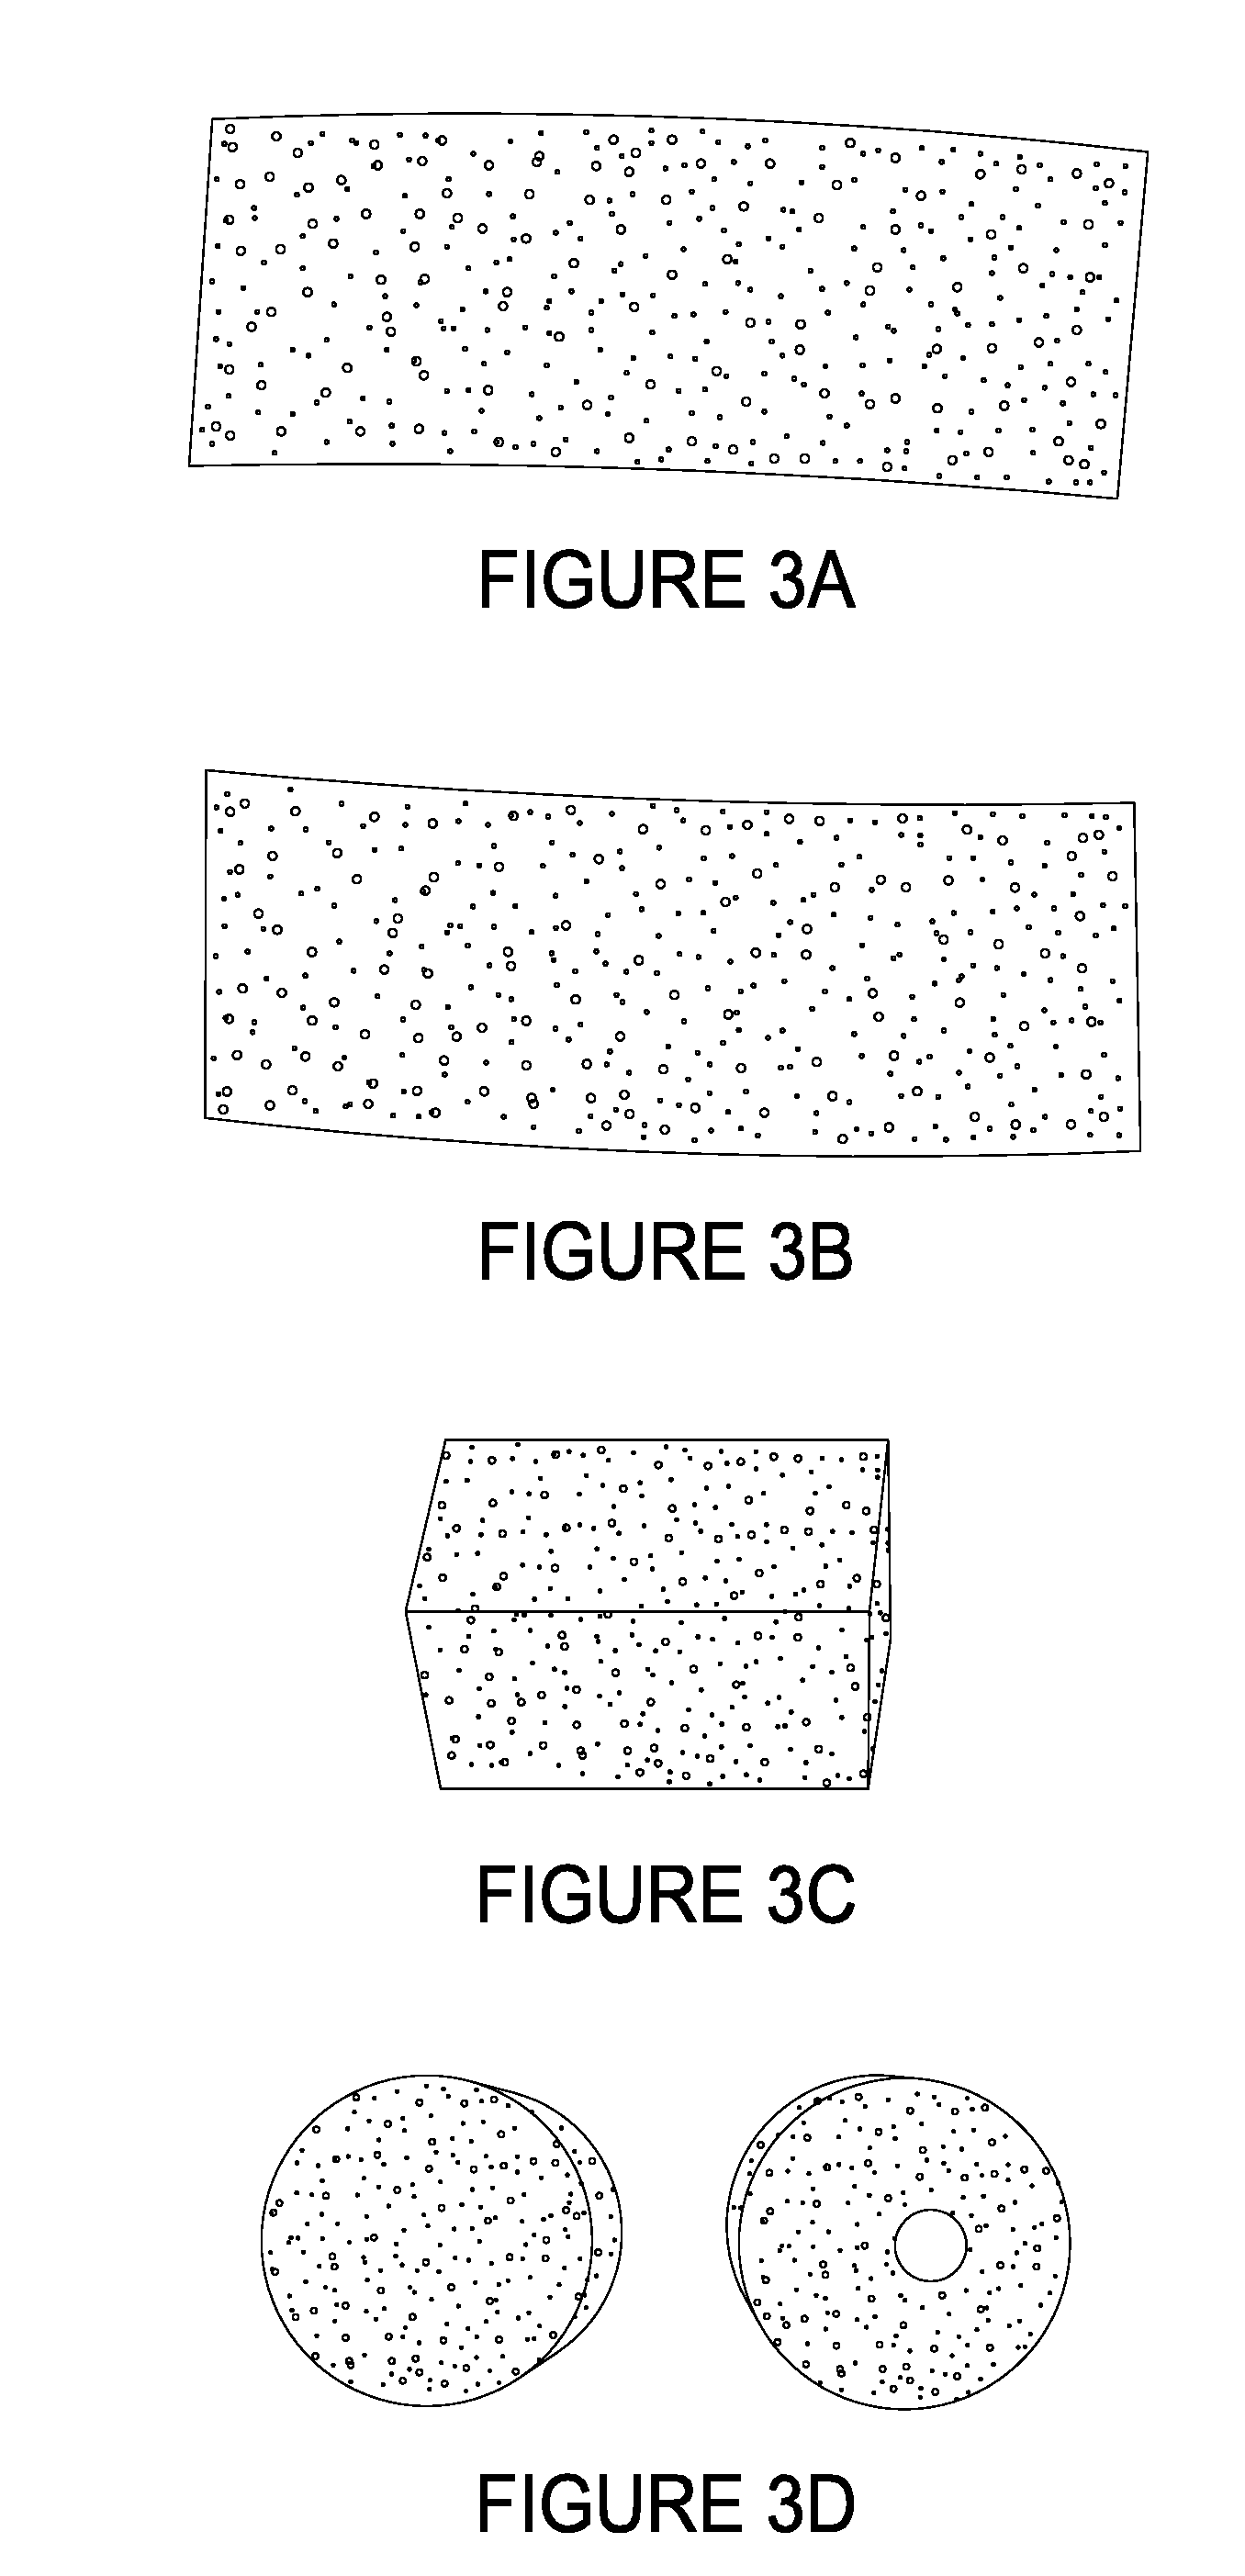 Allografts combined with tissue derived stem cells for bone healing